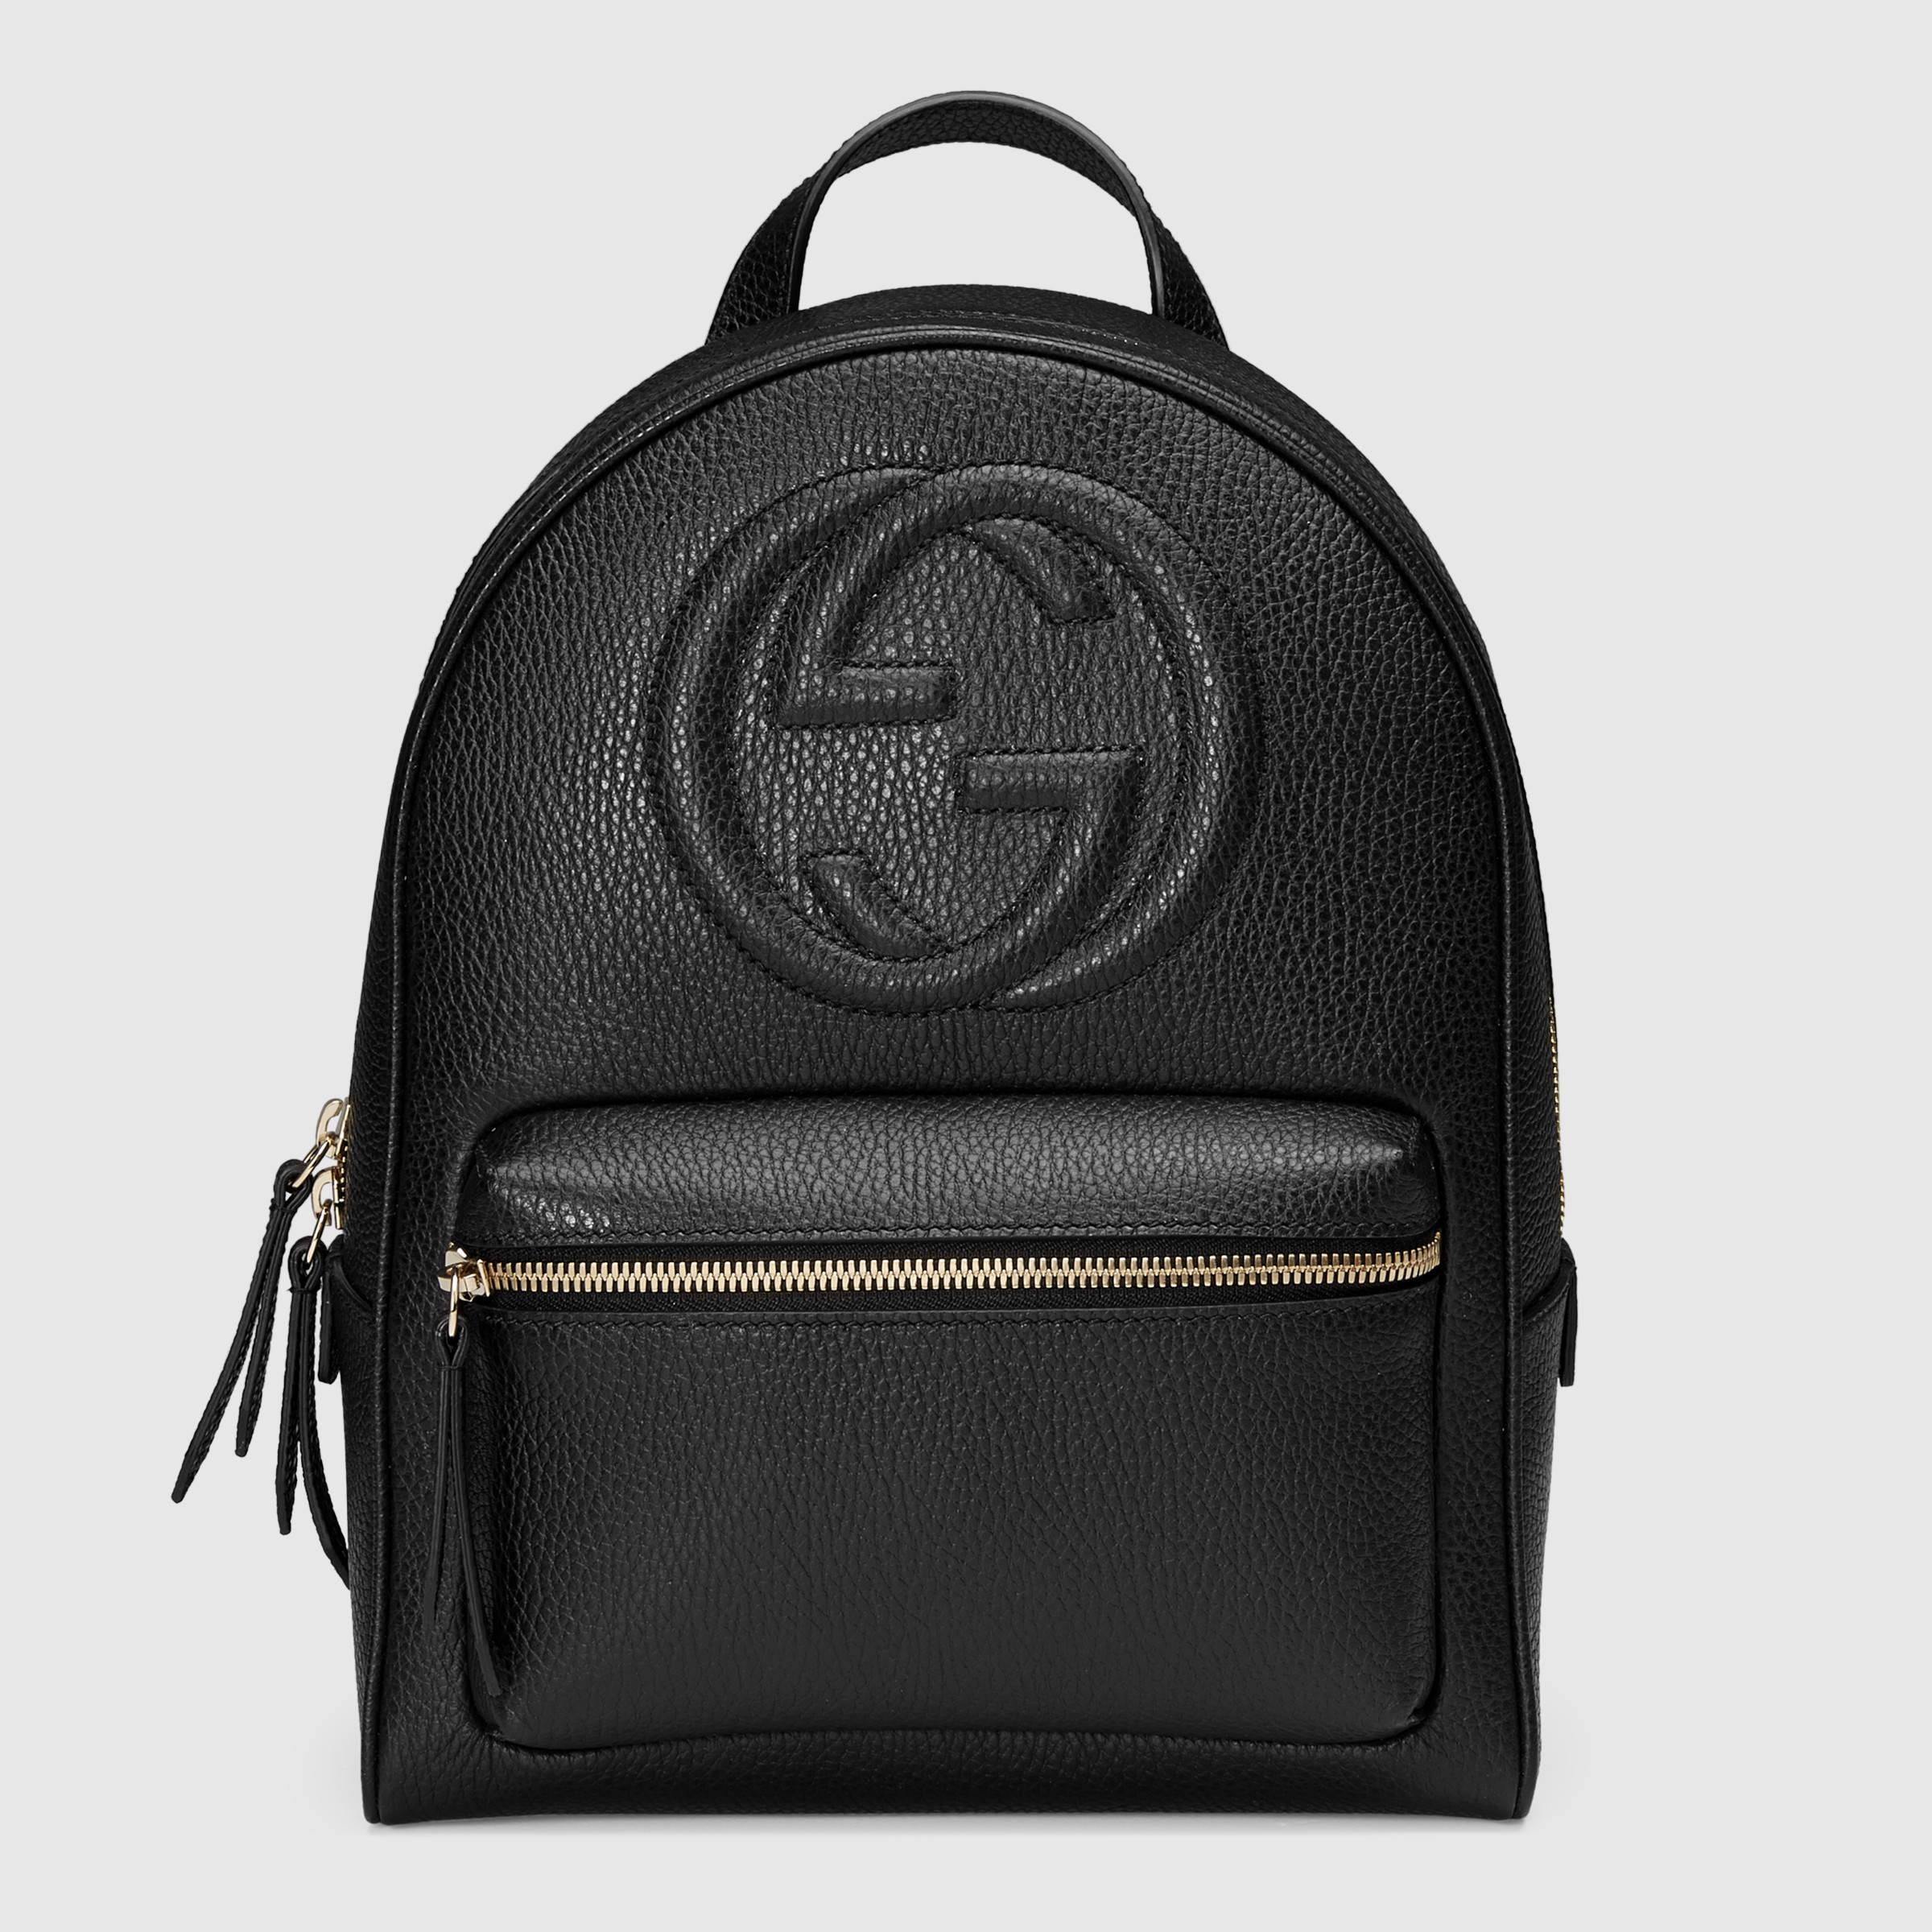 Gucci Soho Leather Chain Backpack in Black | Lyst